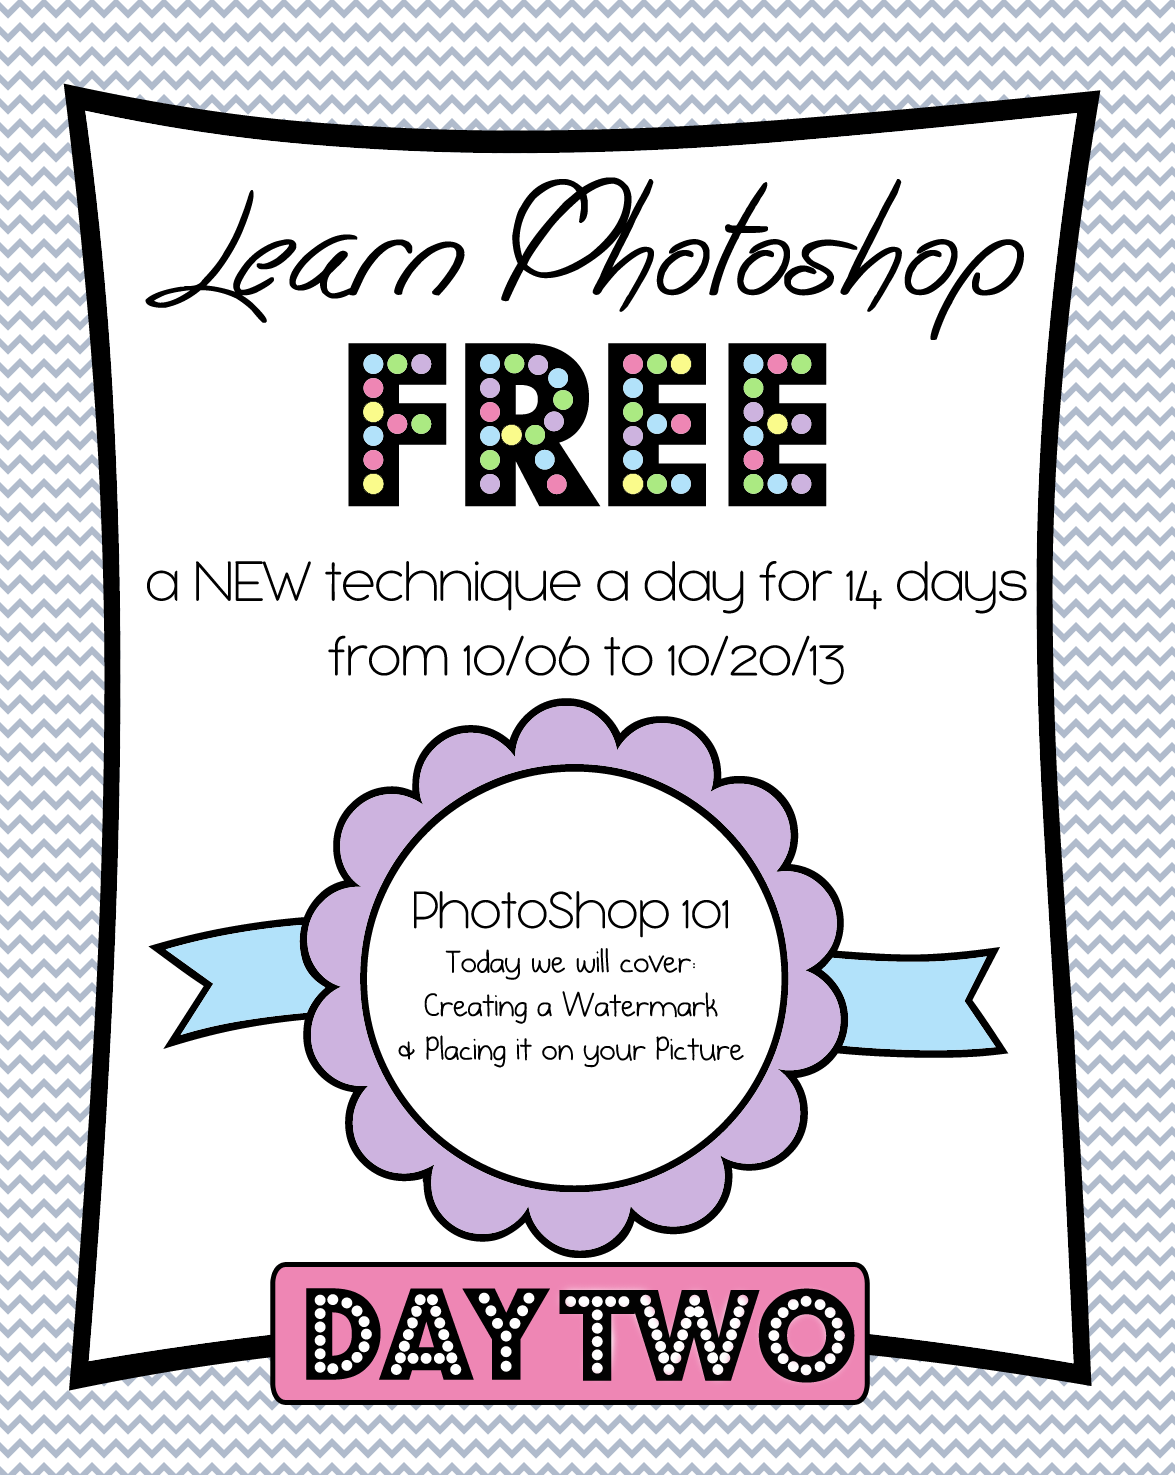 Photoshop Class Day 2 – Watermarks, how to create and place on your image